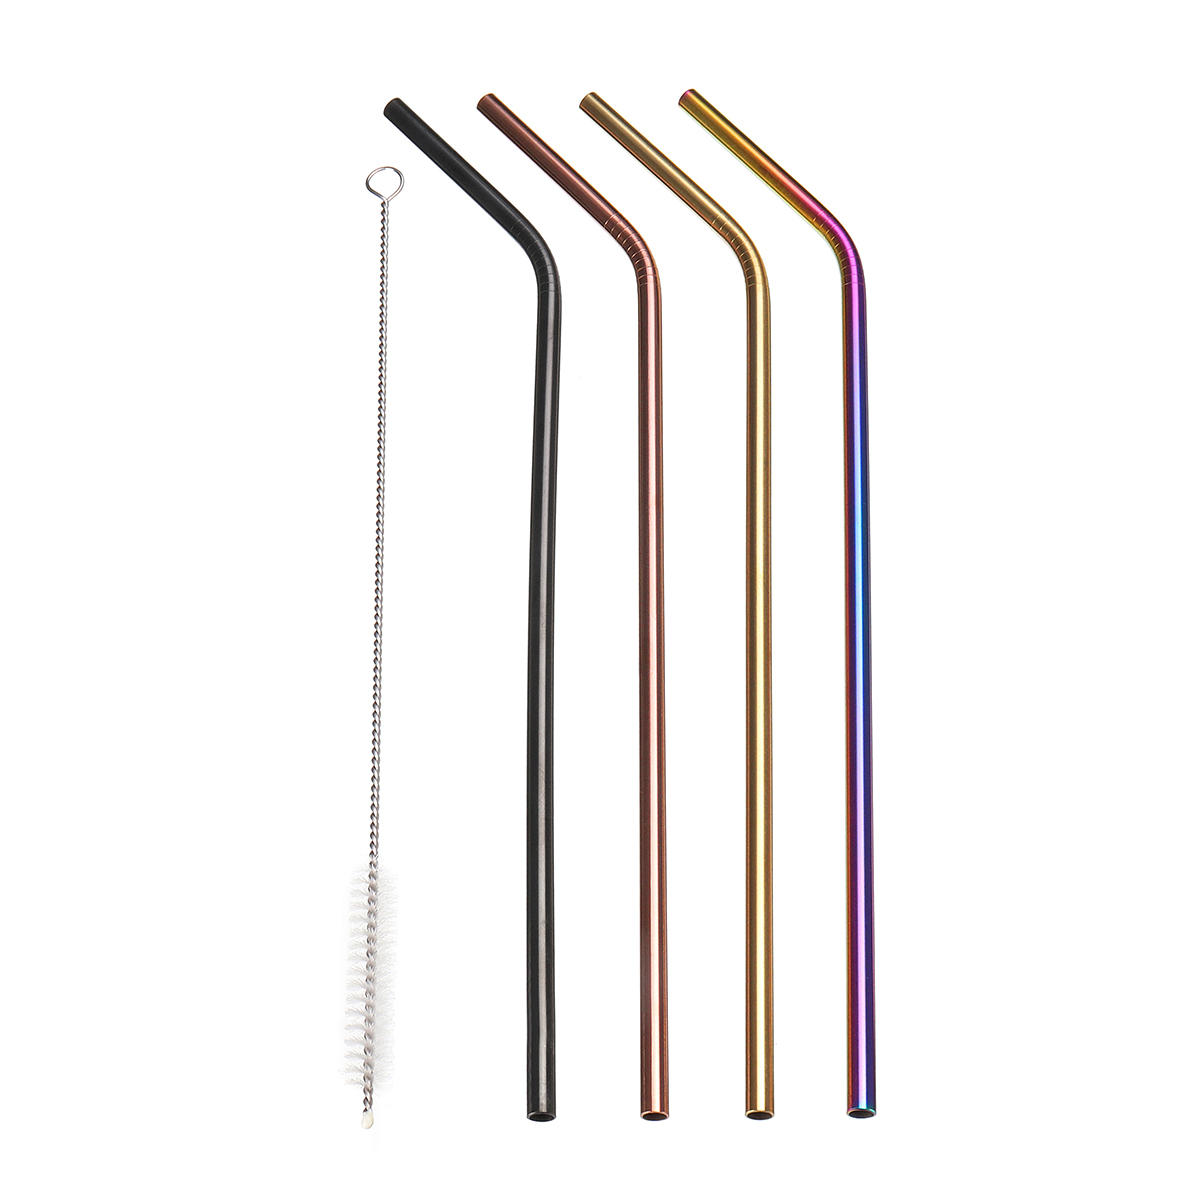 Stainless Steel Metal Drinking Straws Set Kit Reusable Fits Party Bar Decor 